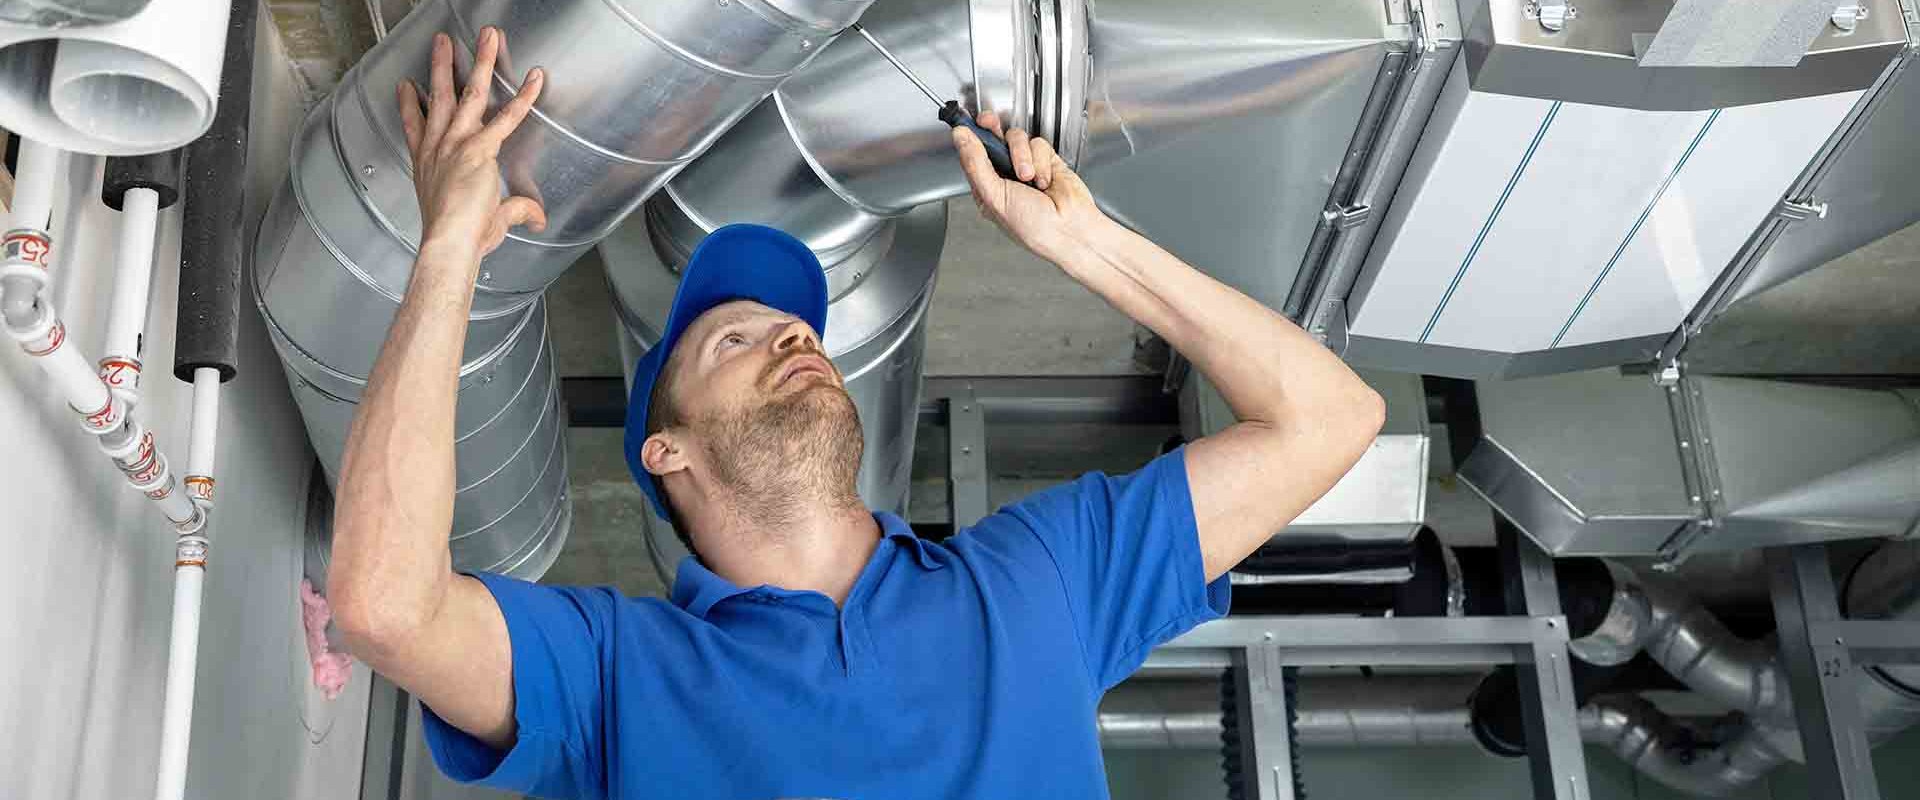 Safety Precautions for HVAC Technicians: Protect Yourself and Your Colleagues